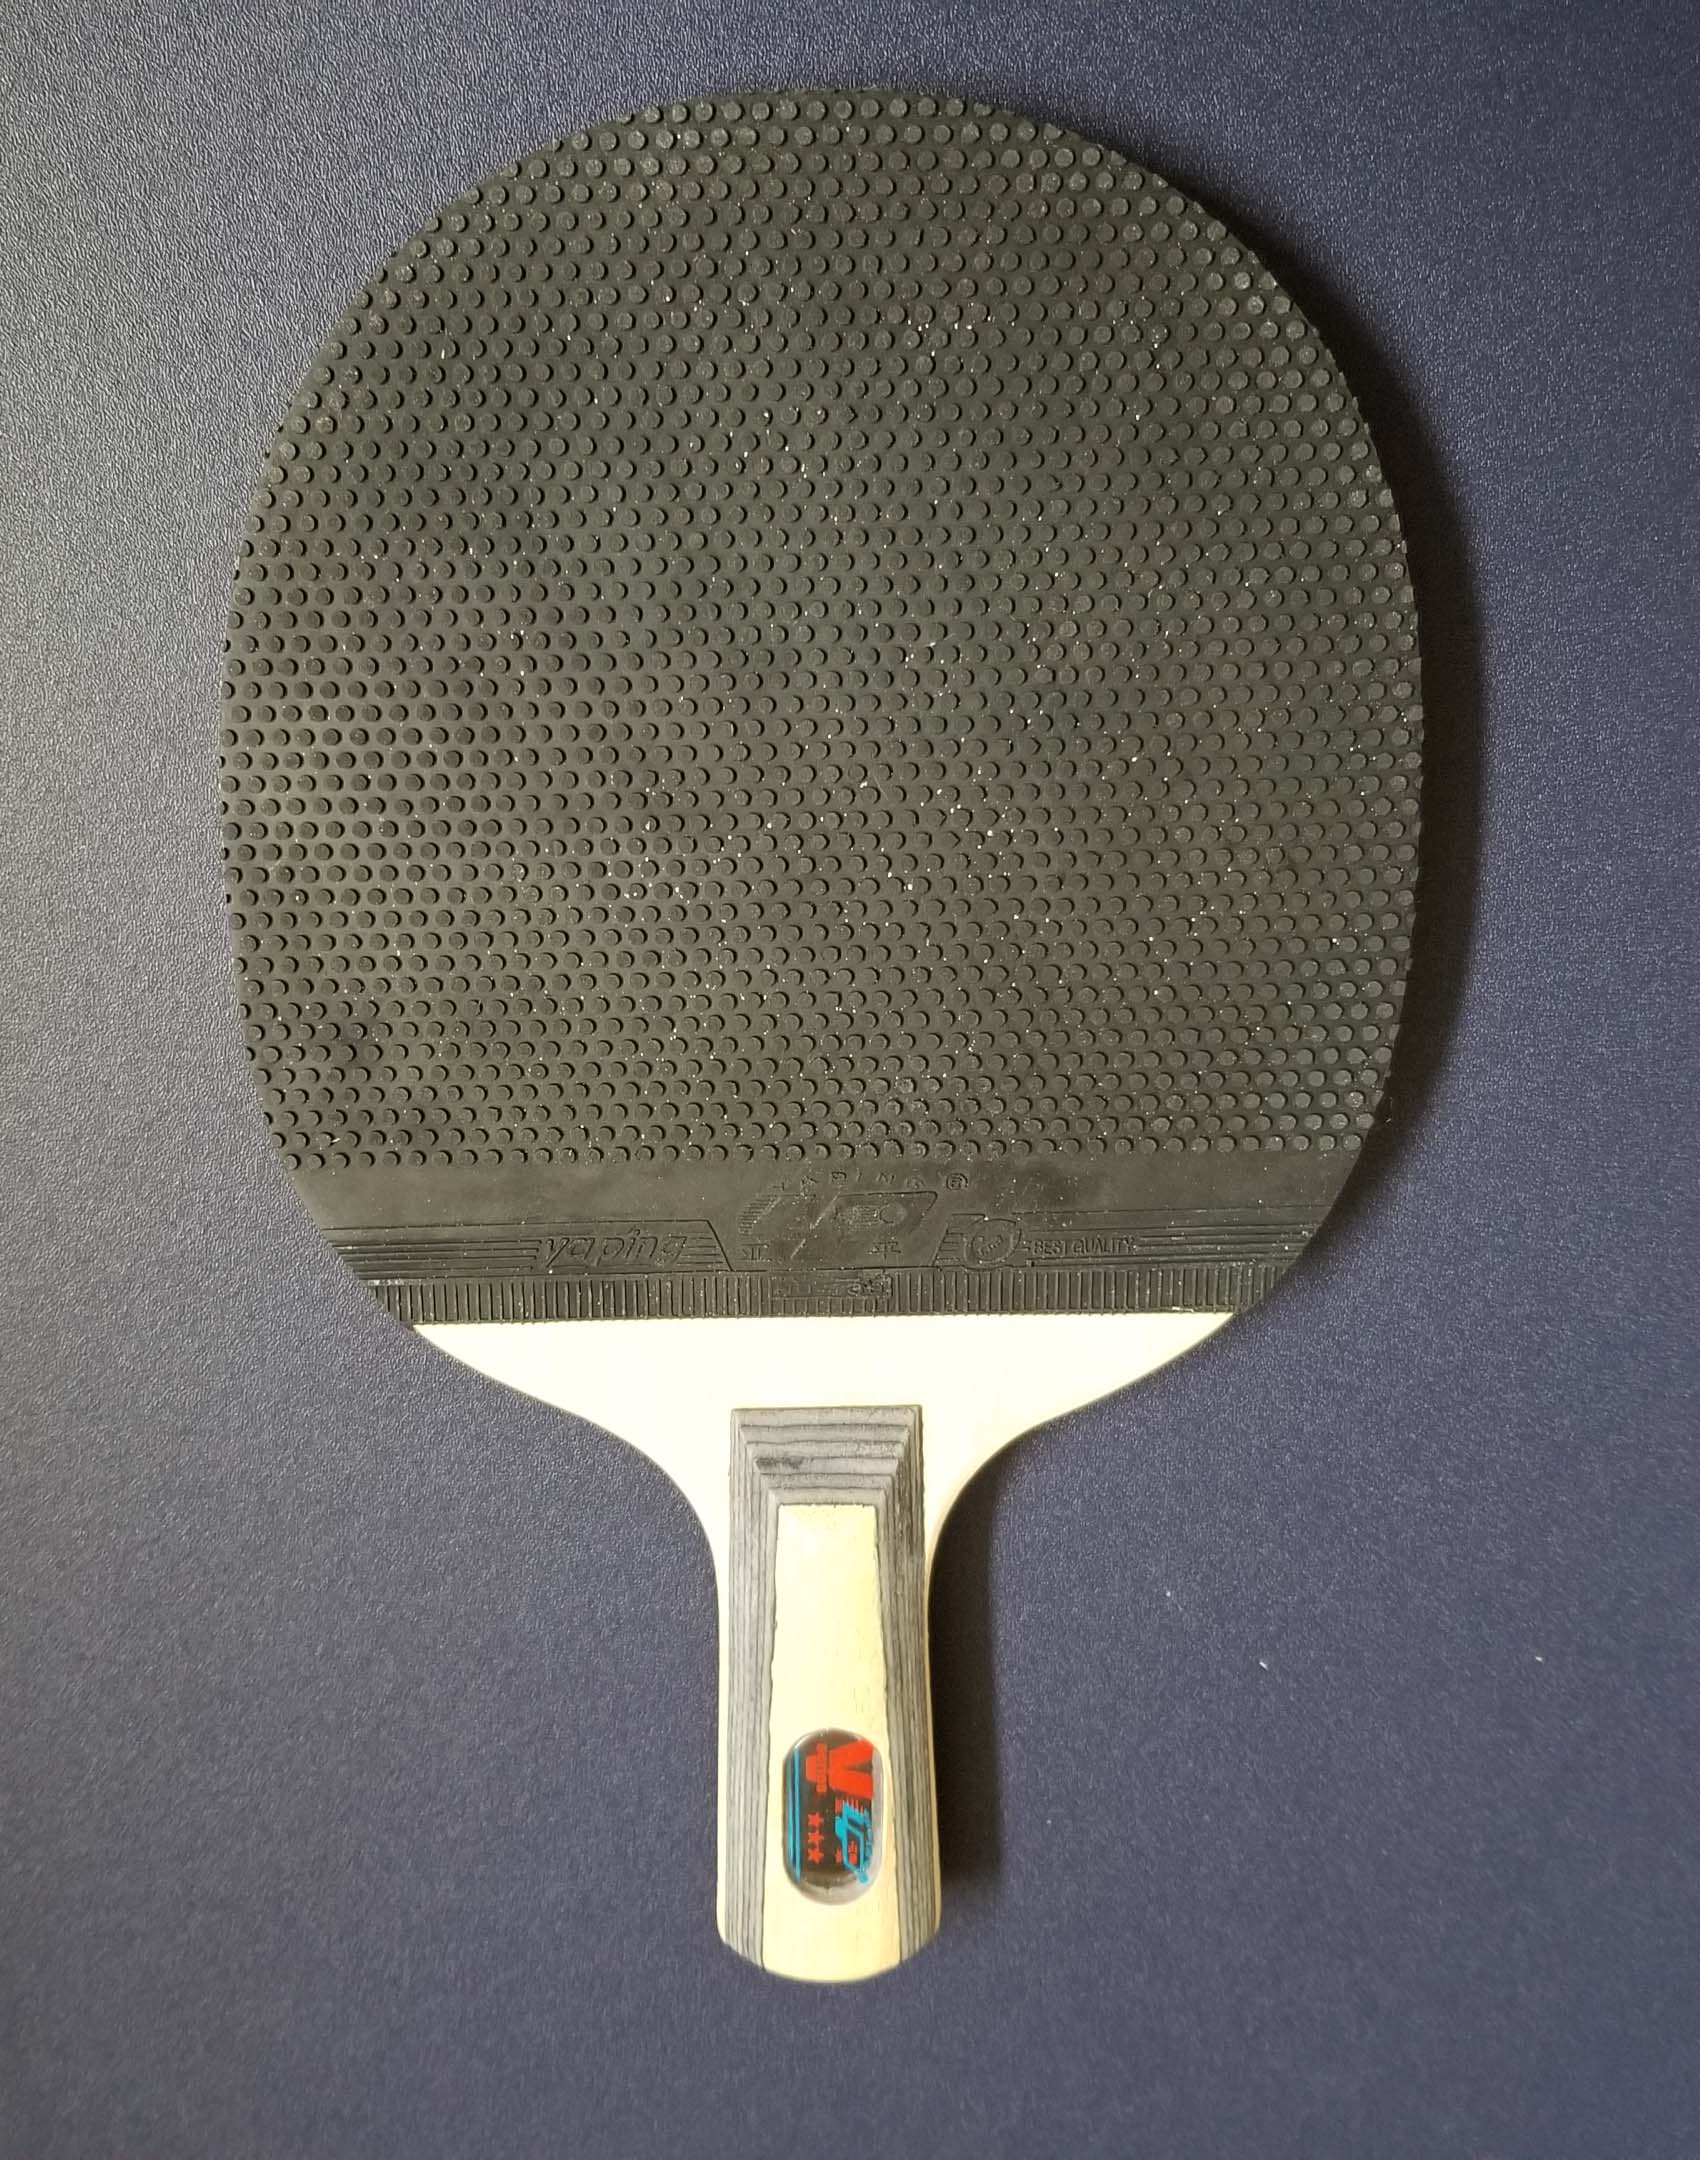 How to improve your table tennis skills